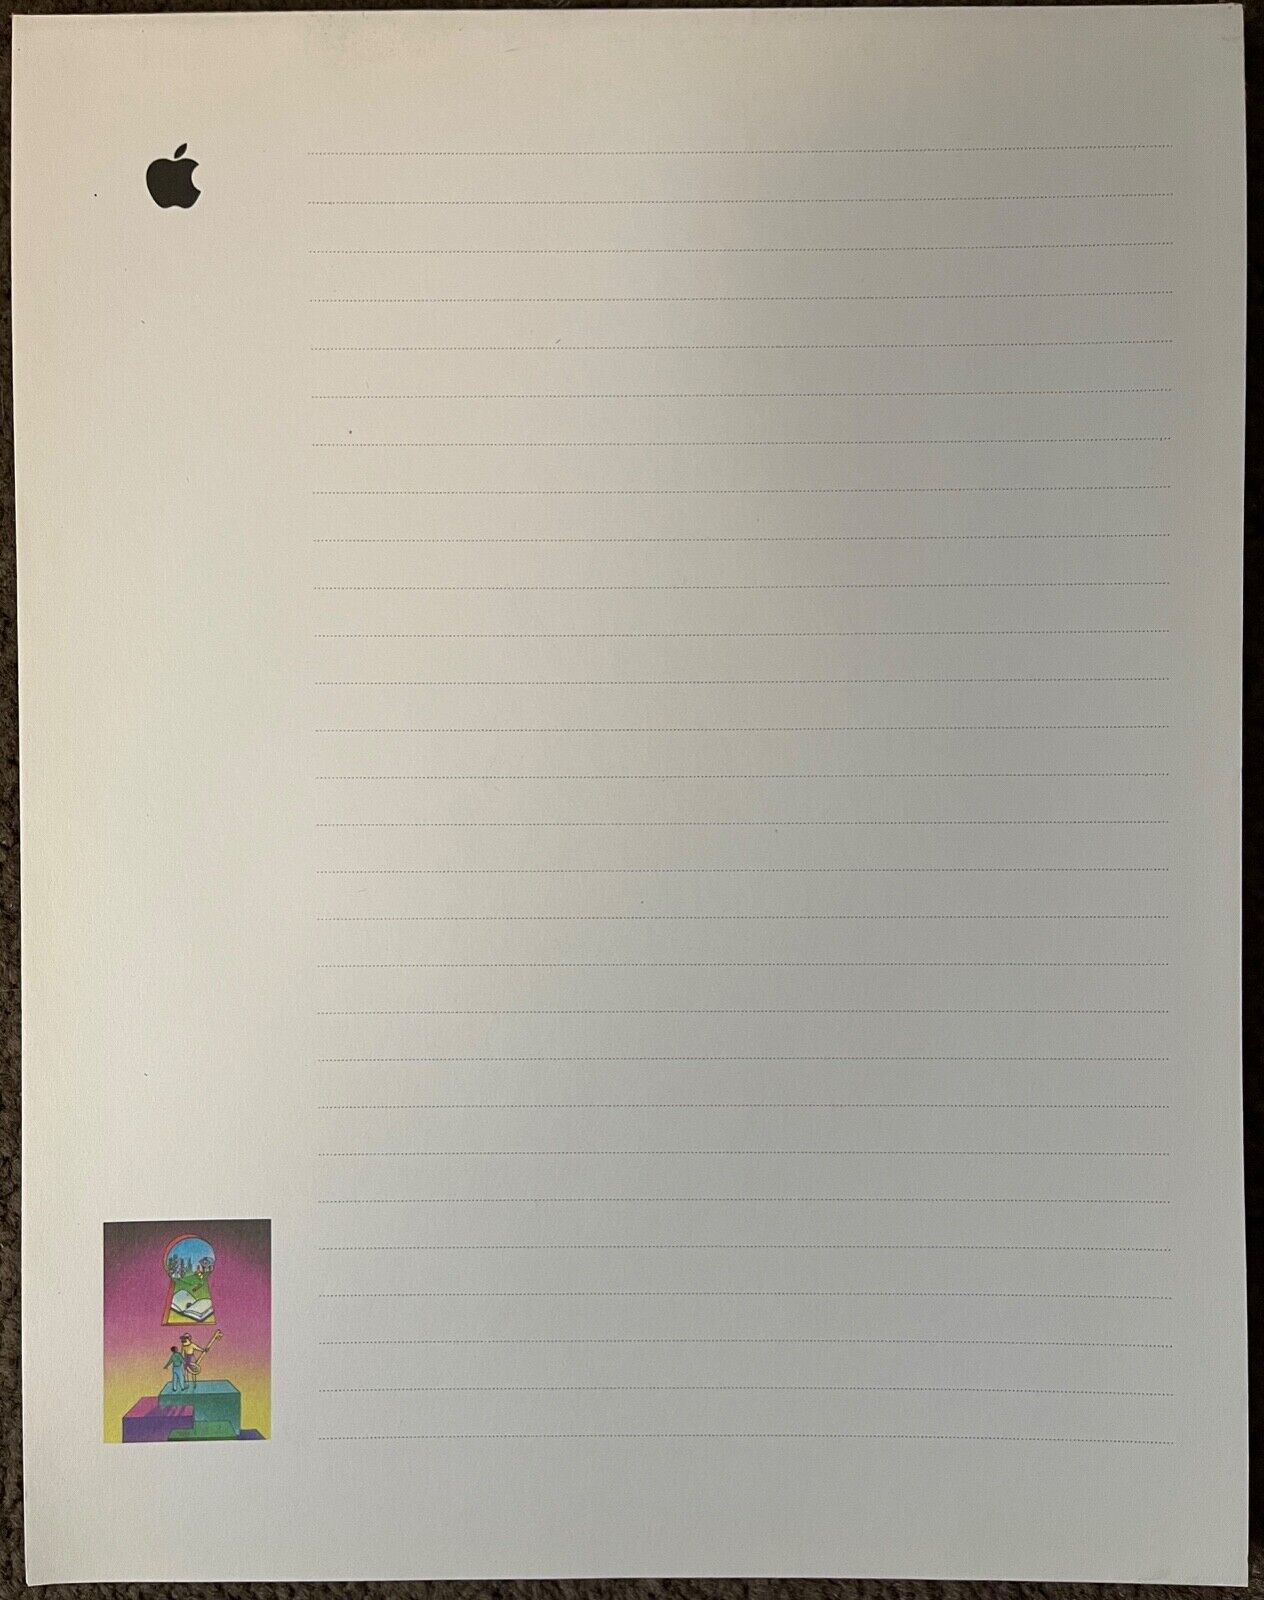 VINTAGE APPLE EDUCATION Notepad w/ Lined Paper with Apple logo RARE (50 sheets)